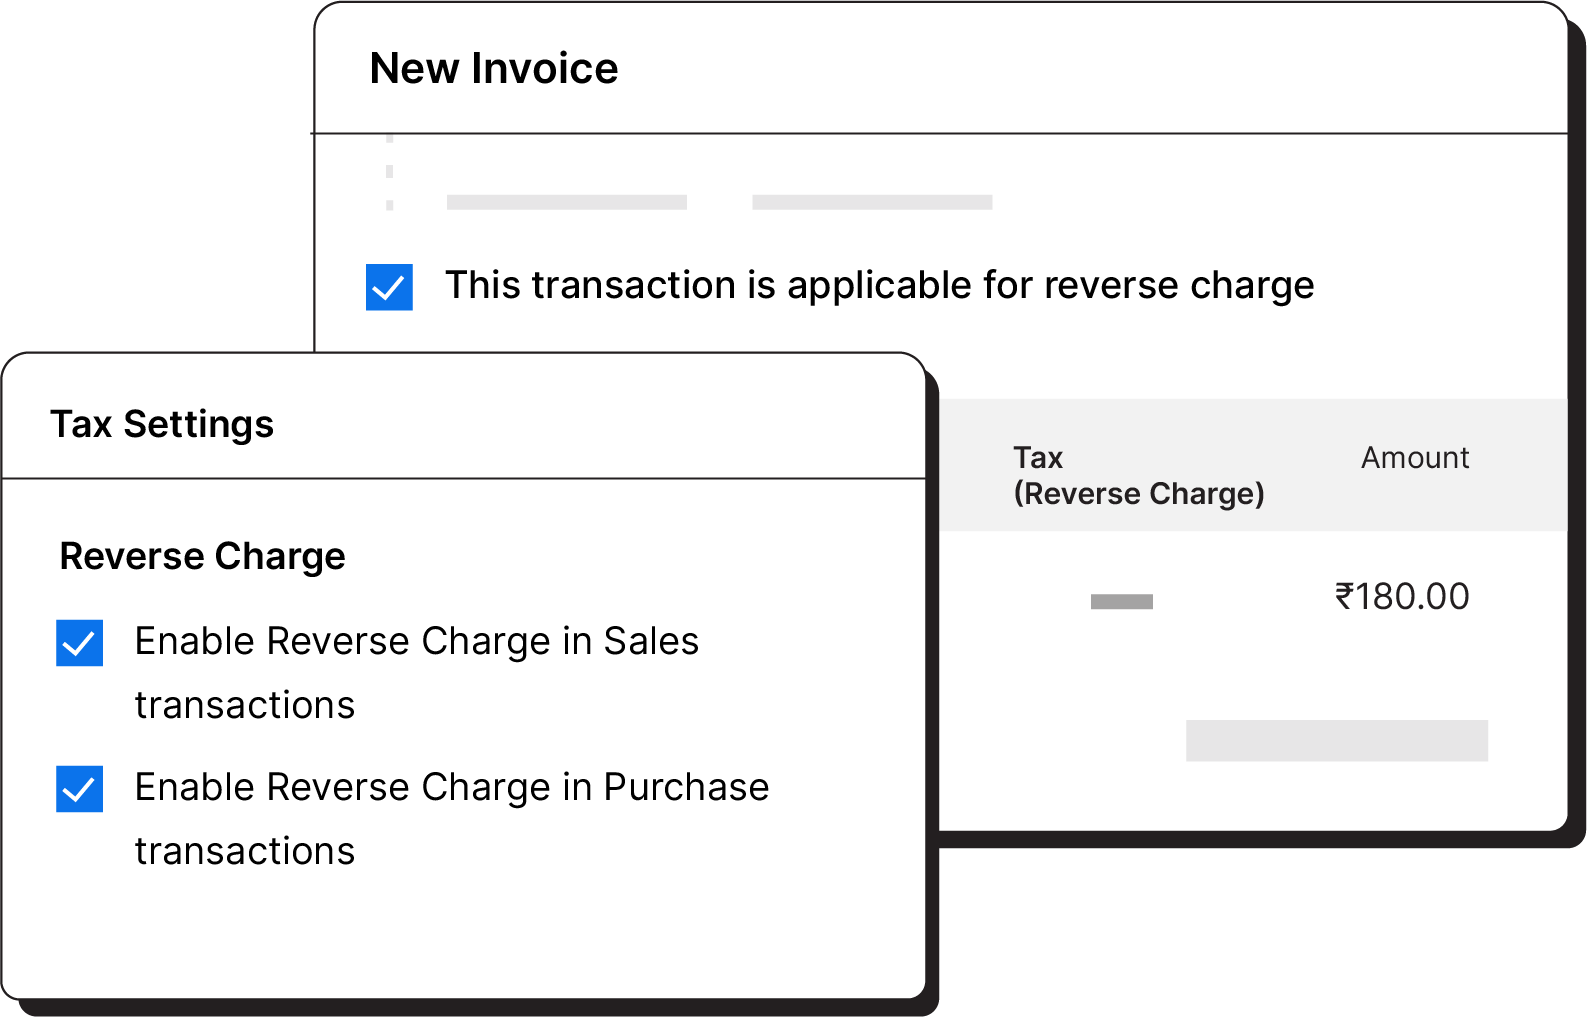 Apply reverse charge to transactions - Global edition